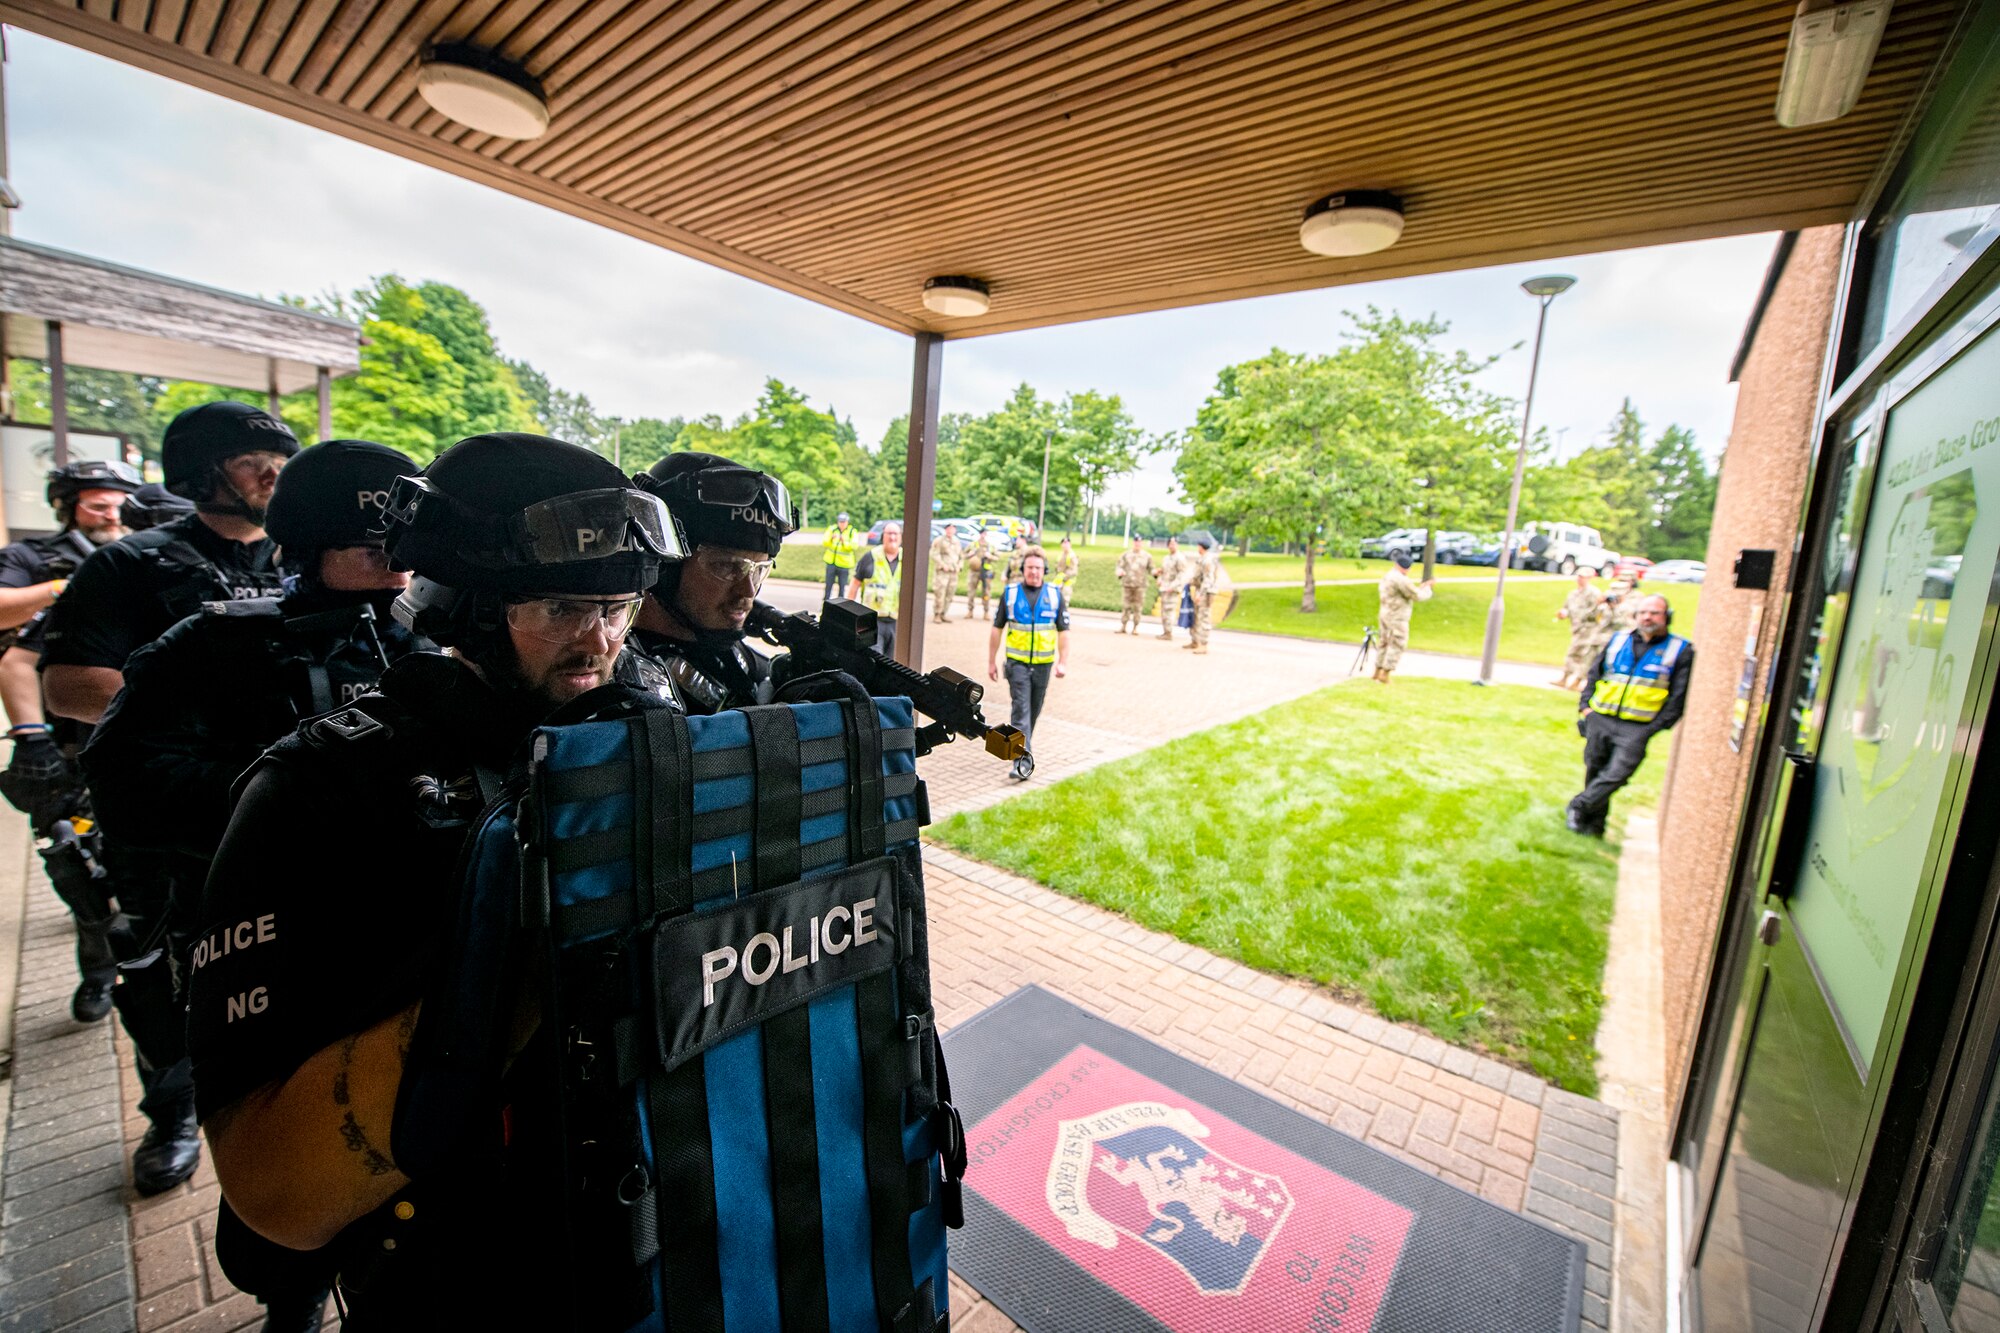 Police Officers from the Northamptonshire police department, prepare to enter a building during a tri-agency active shooter response exercise at RAF Croughton, England, June 30, 2021. Airmen from the 422nd Security Forces Squadron along with police officers from the NHPD and Ministry of Defense, participated in multiple exercises to enhance their search and seizure tactics, strengthen local ties and gain rapport with their fellow officers. (U.S. Air Force photo by Senior Airman Eugene Oliver)